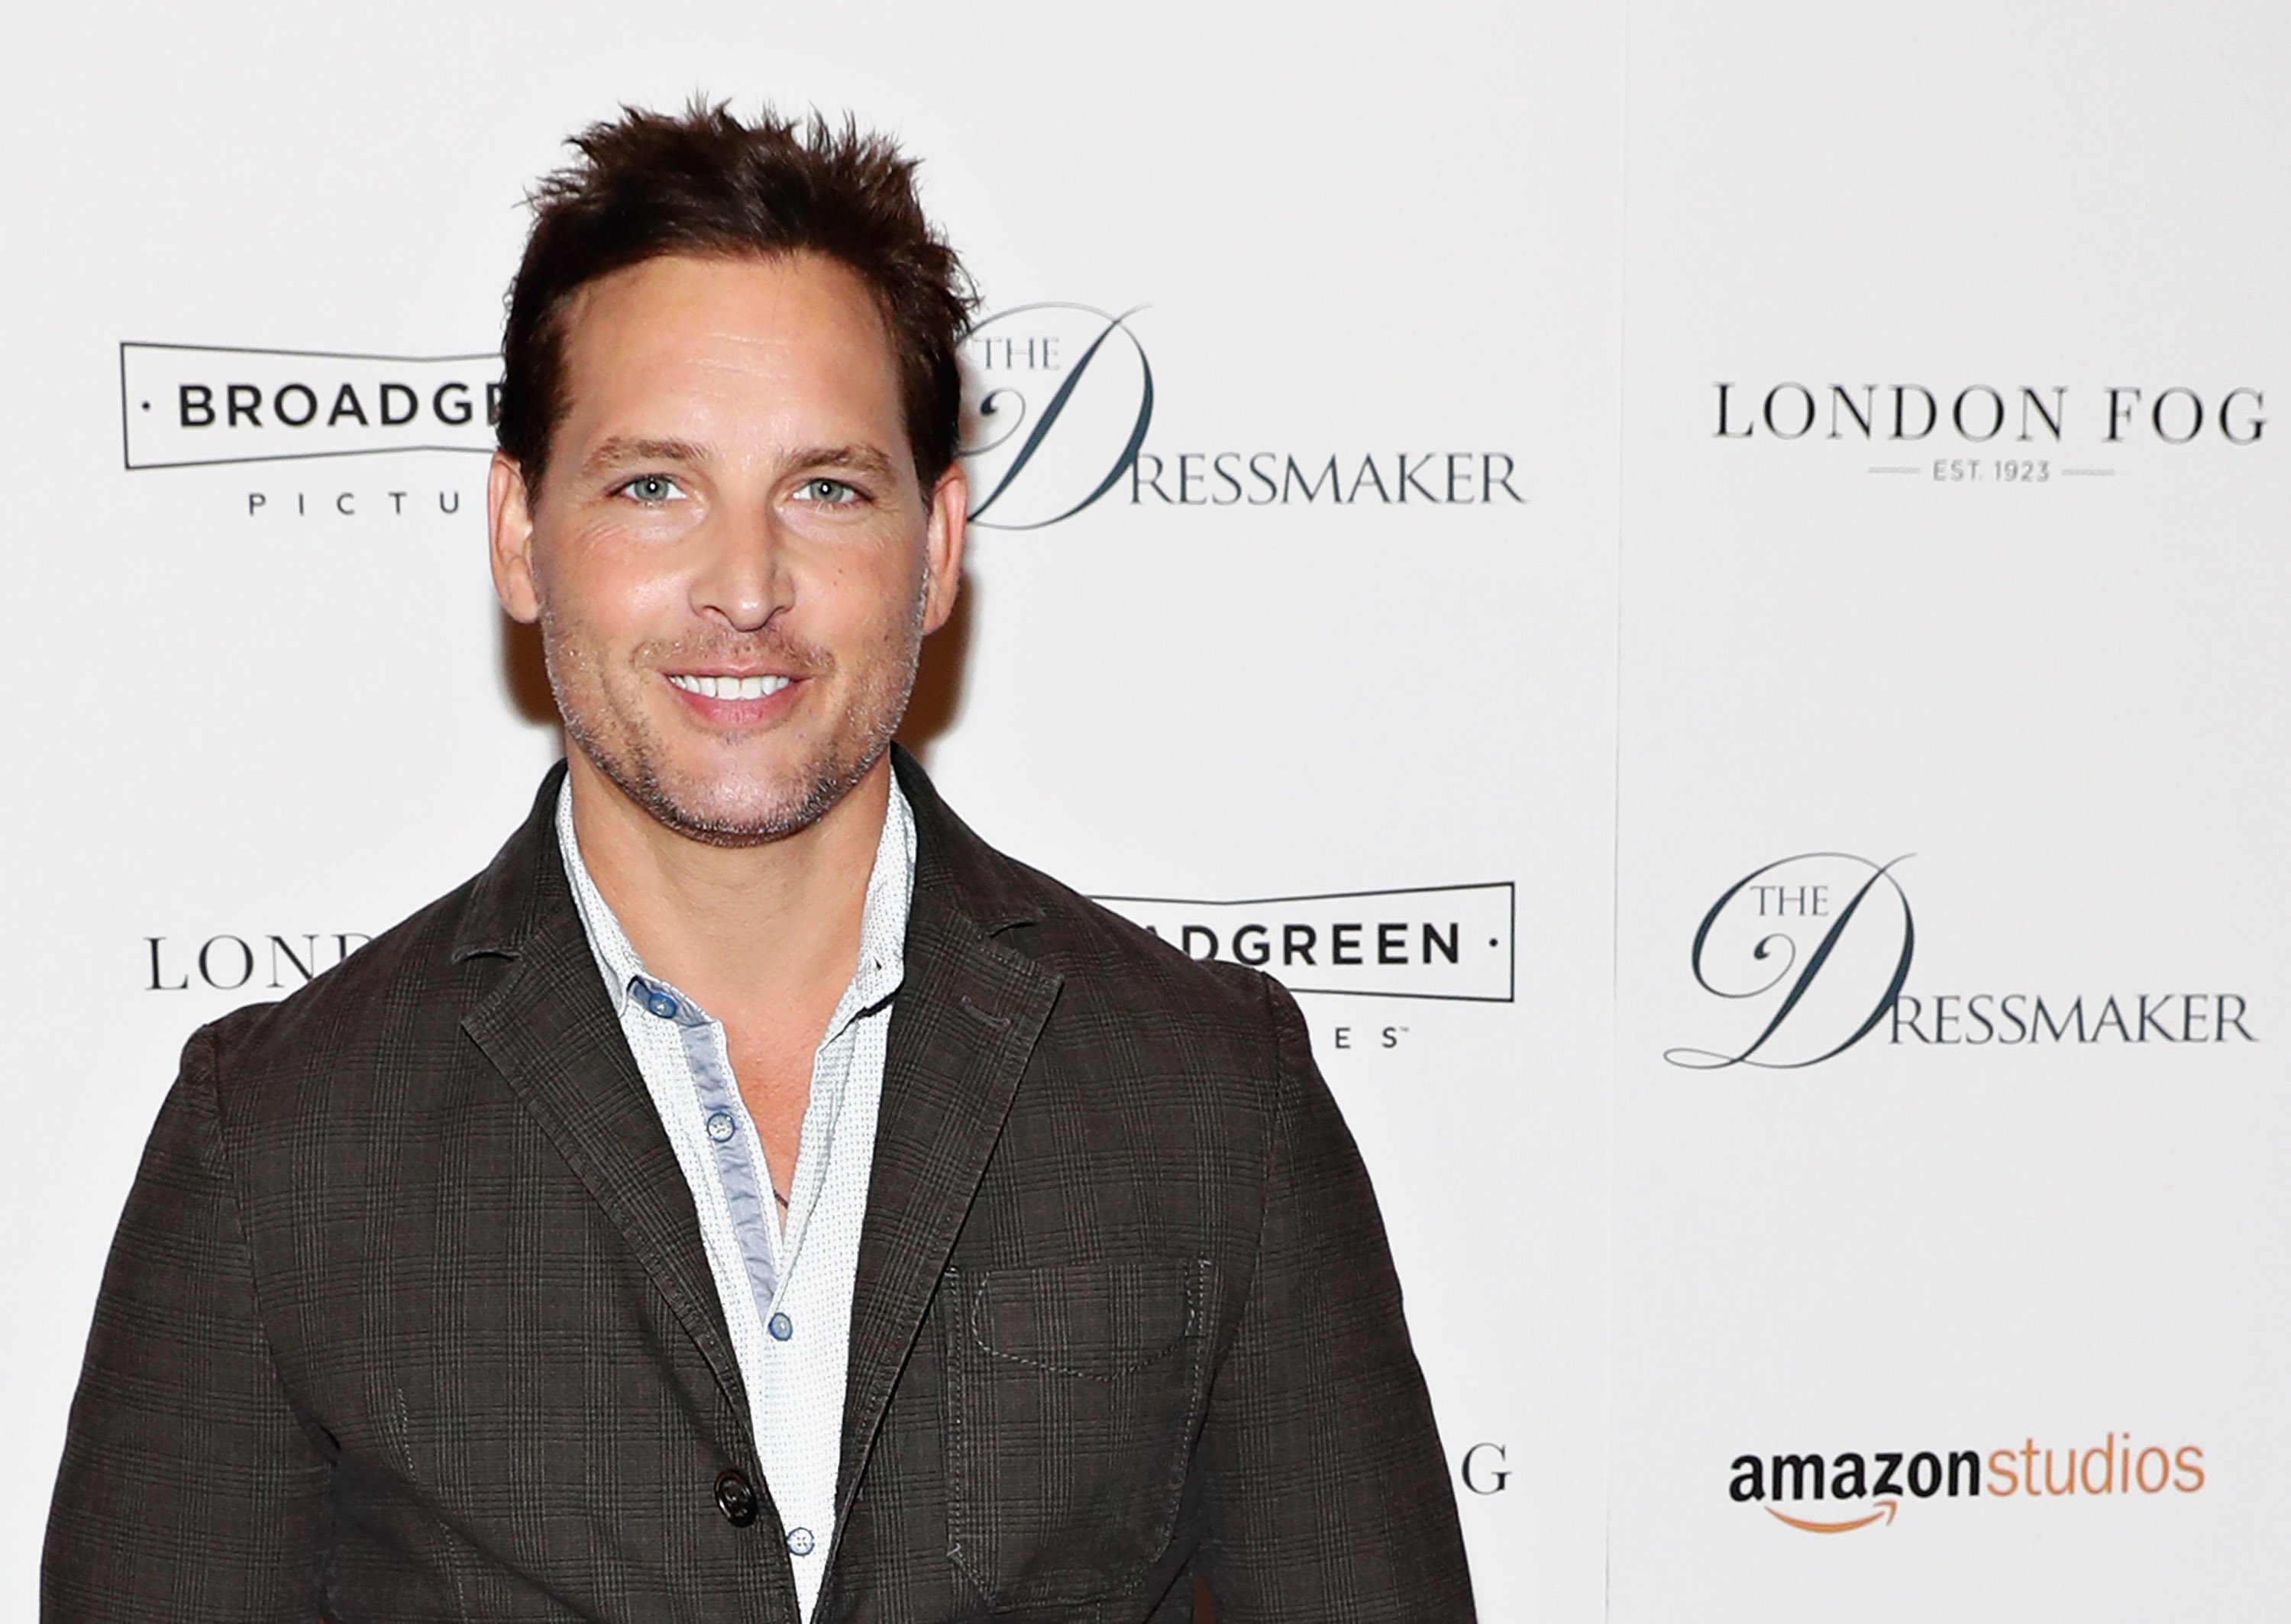 Actor Peter Facinelli attends the 2016 screening of "The Dressmaker" in New York City. | Photo: Getty Images